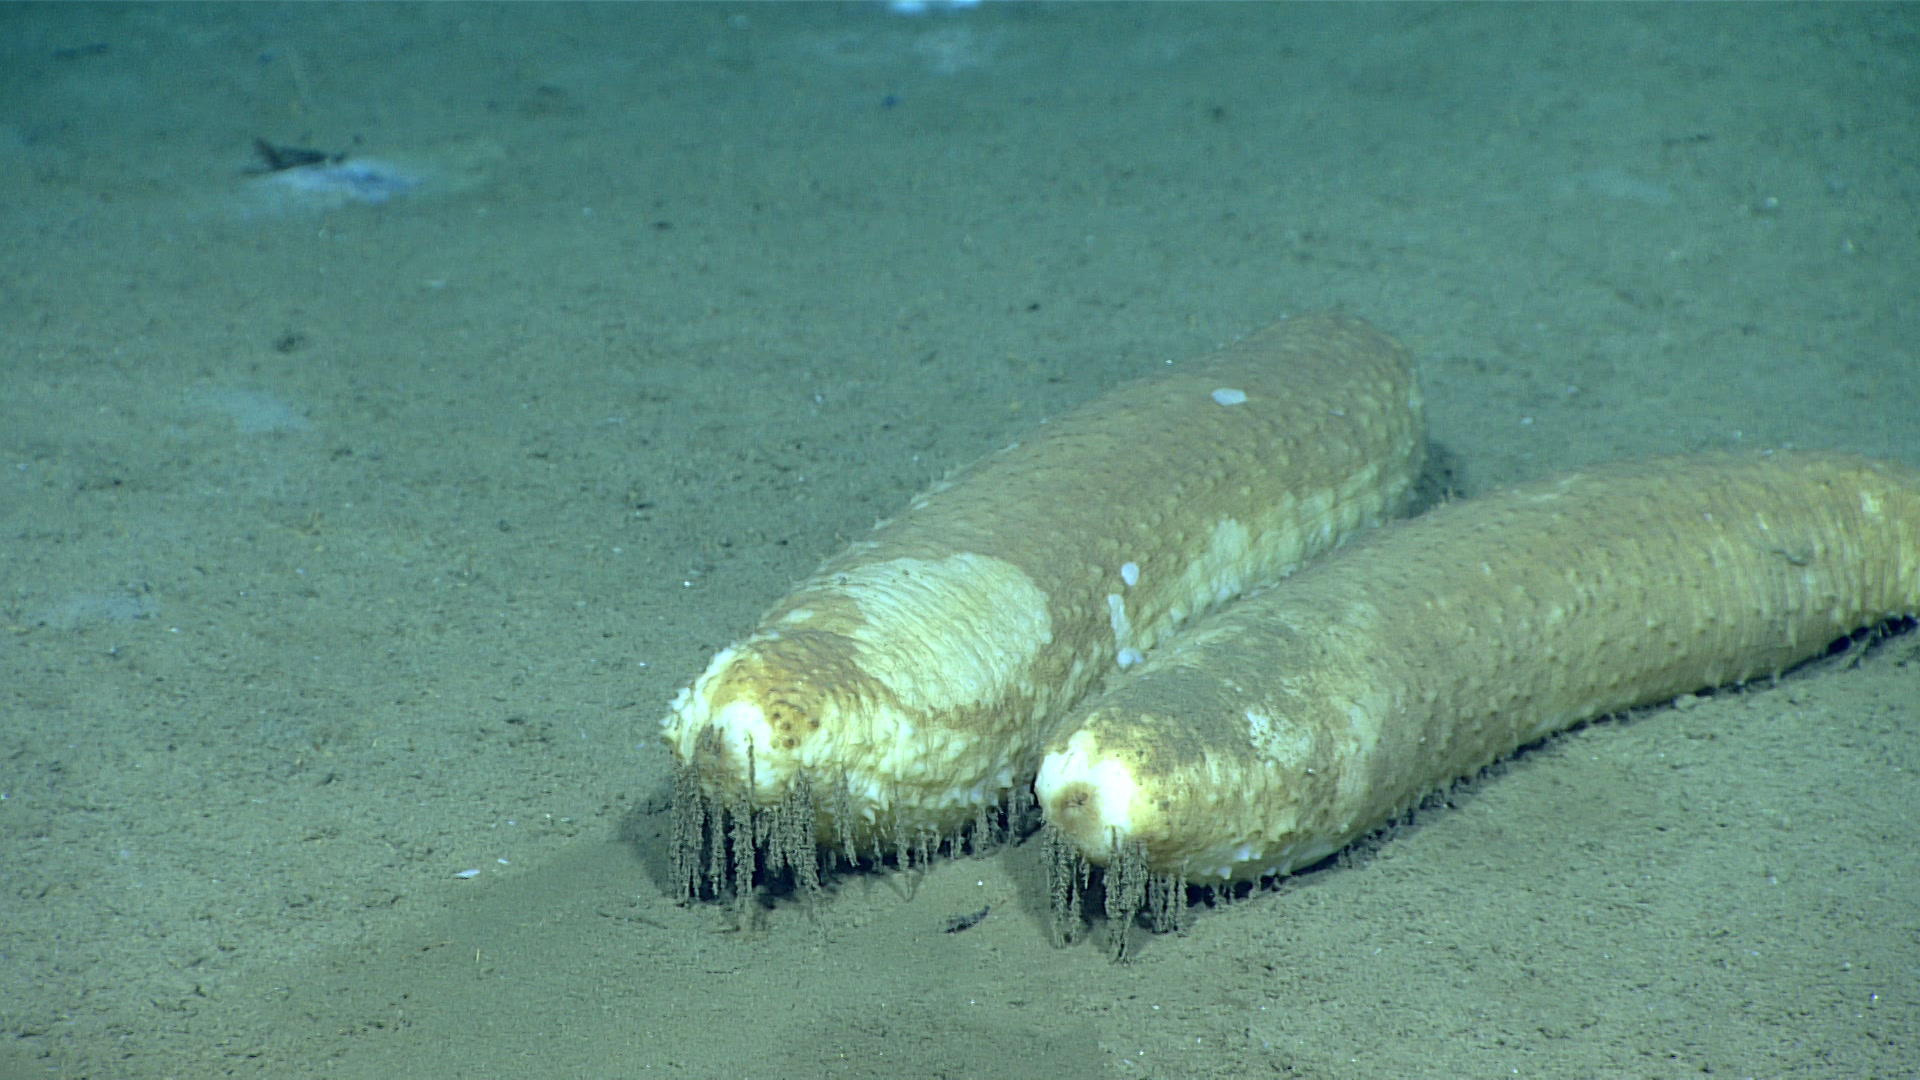 Paroriza pallens</i> sea cucumbers are hermaphroditic, meaning individuals have both male and female reproductive organs. During a dive to explore in the Gulf of Mexico, we frequently encountered these deposit feeders in pairs such as this one. The nature of the shaggy filaments hanging from the flanks of these sea cucumbers remains a mystery.